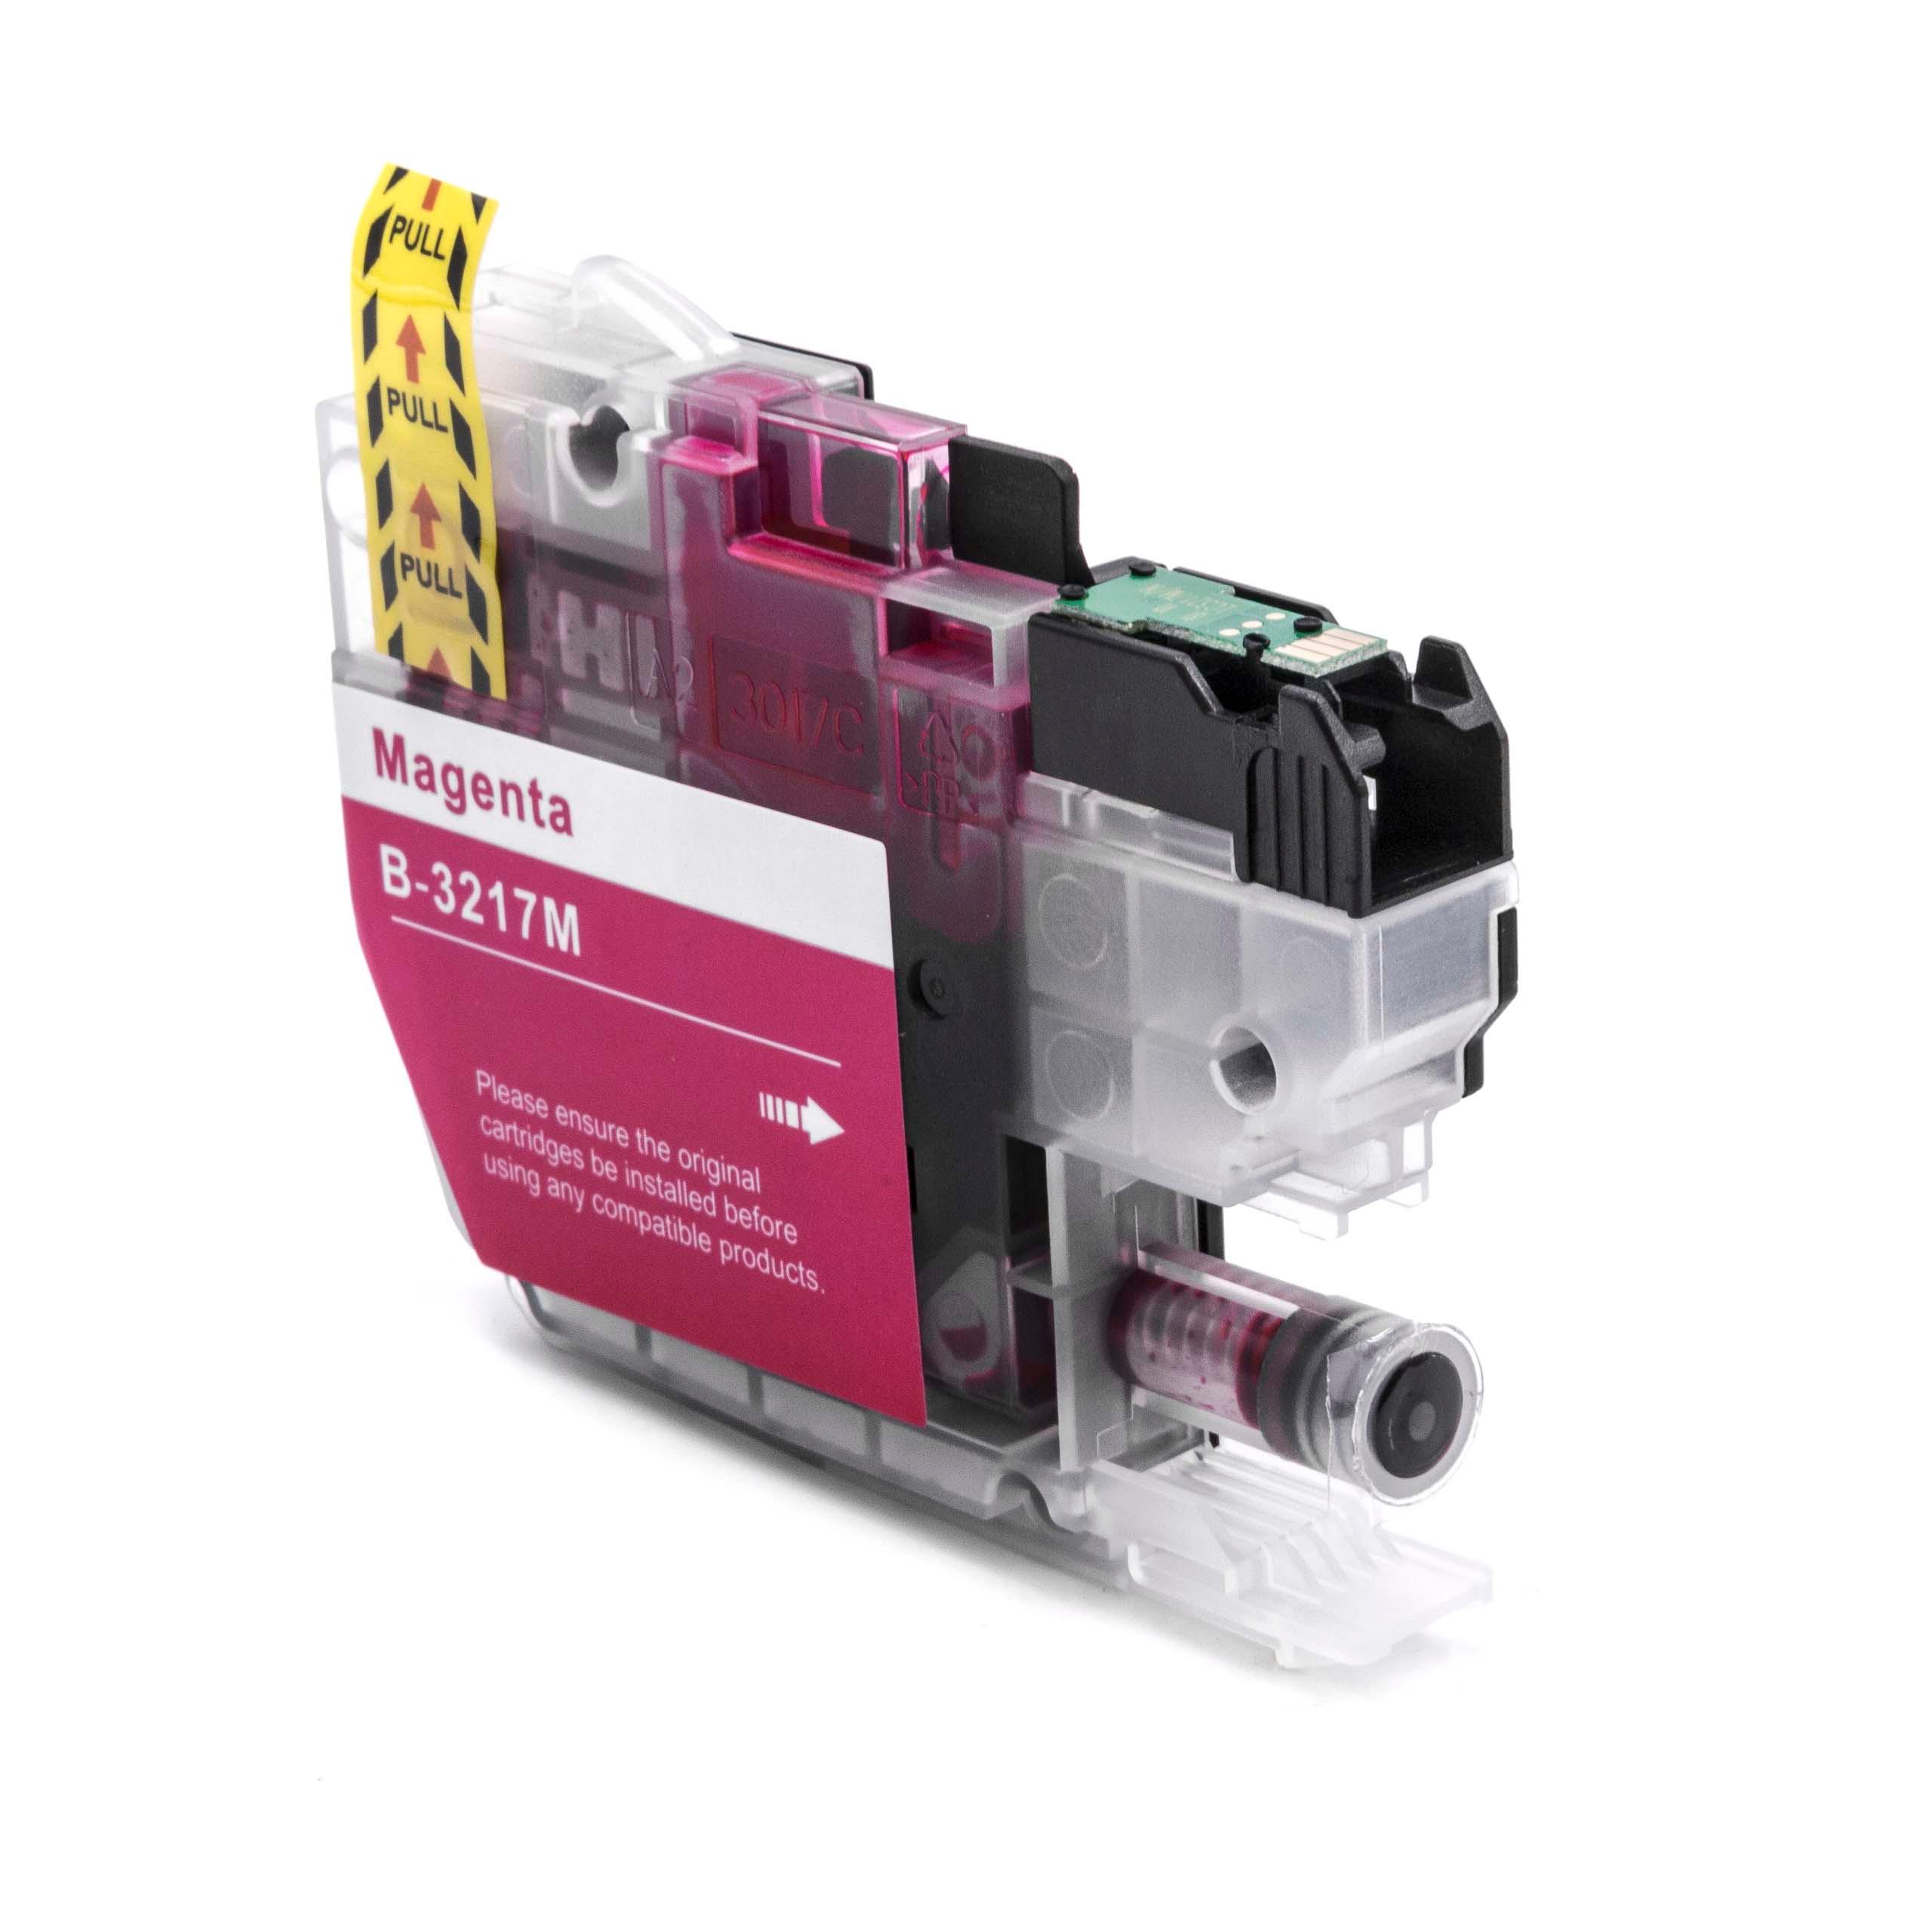 Ink Cartridge as Exchange for Brother LC3217M, LC-3217M for Brother Printer - Magenta 12 ml + Chip